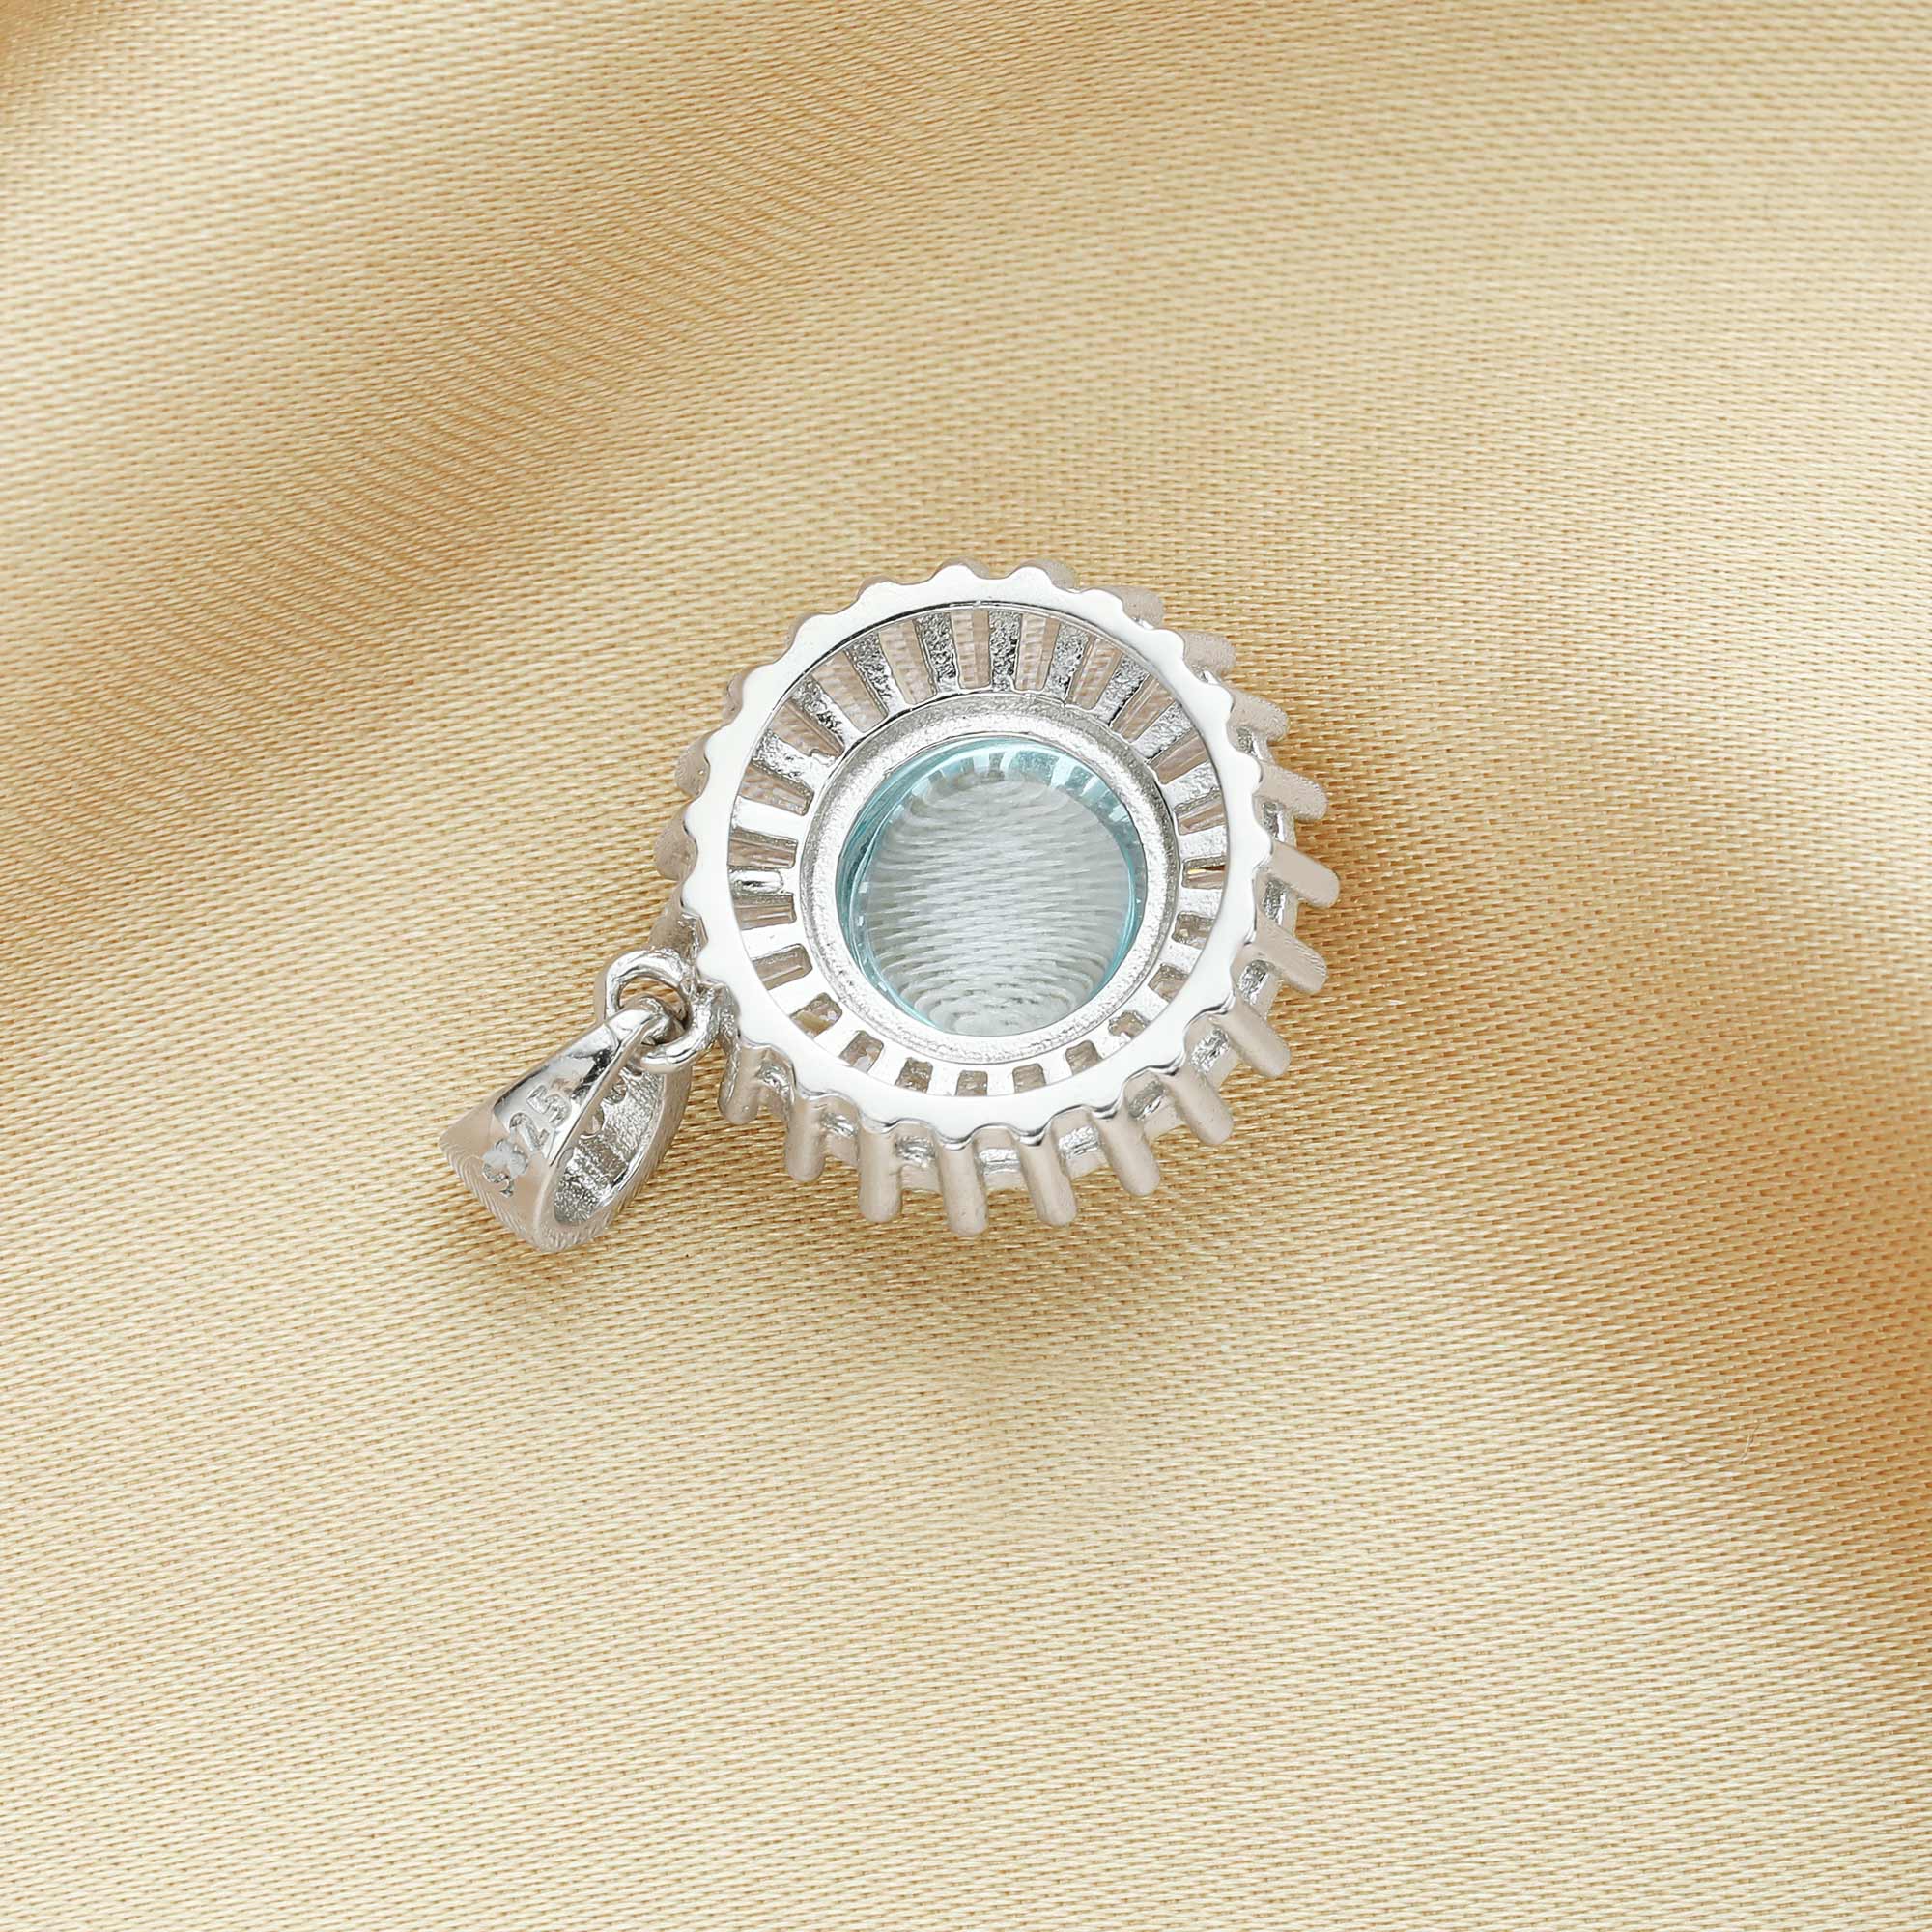 15MM Round Birthstone Charm with 8MM Sky Blue Topaz Cabochon,Solid 925 Sterling Silver Charm,November Birthstone Pendant,DIY Jewelry Supplies 1411320 - Click Image to Close